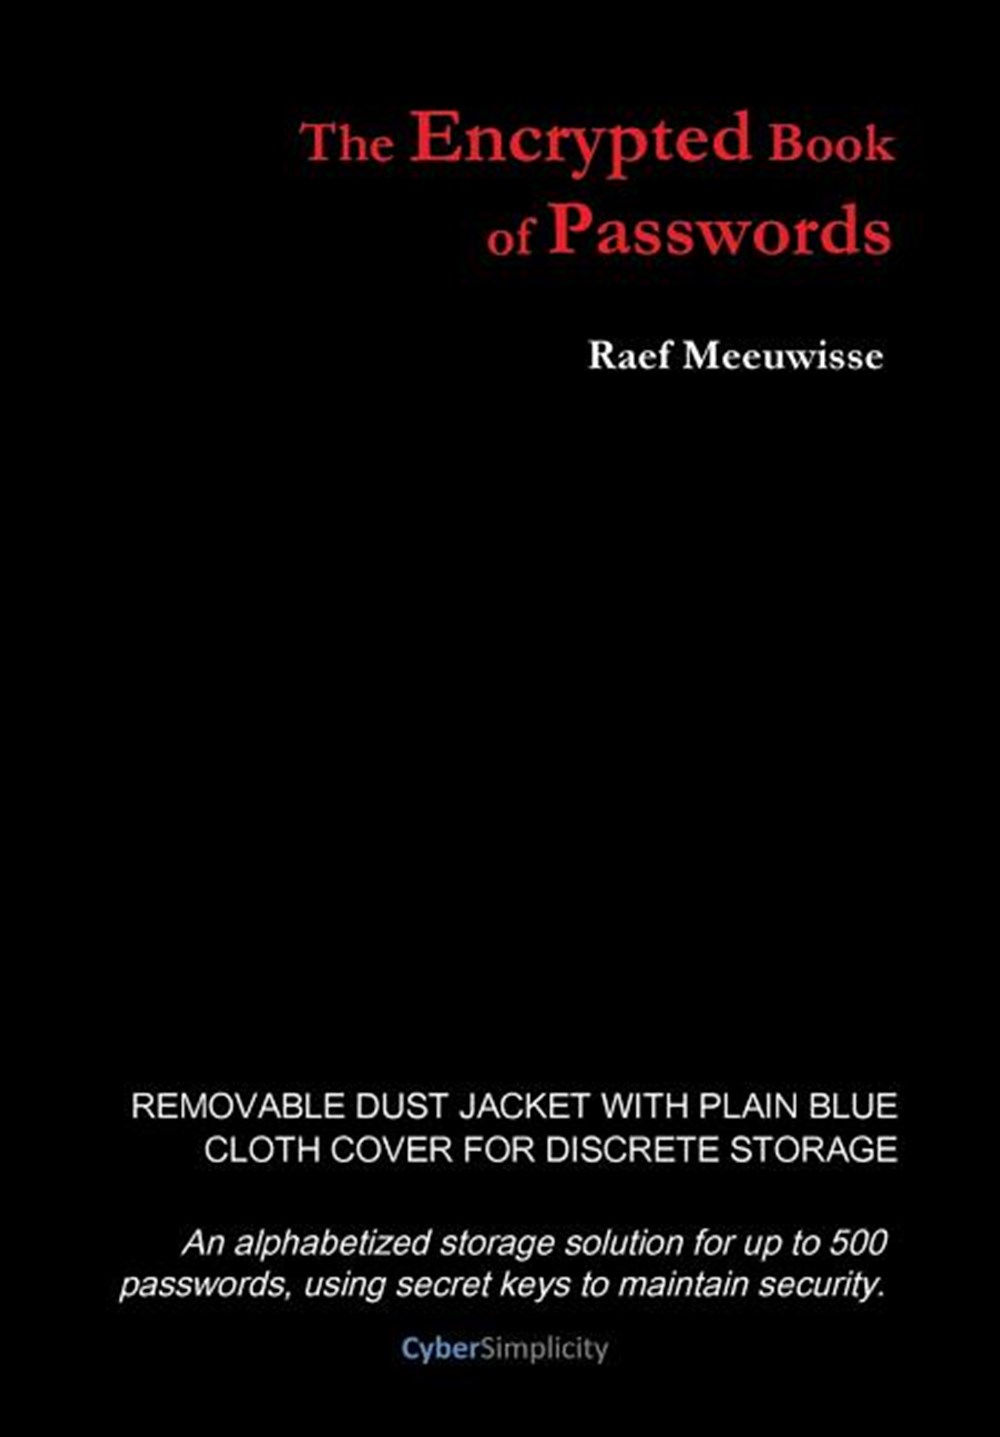 Encrypted Book of Passwords (Second Harback Removable Jacket)